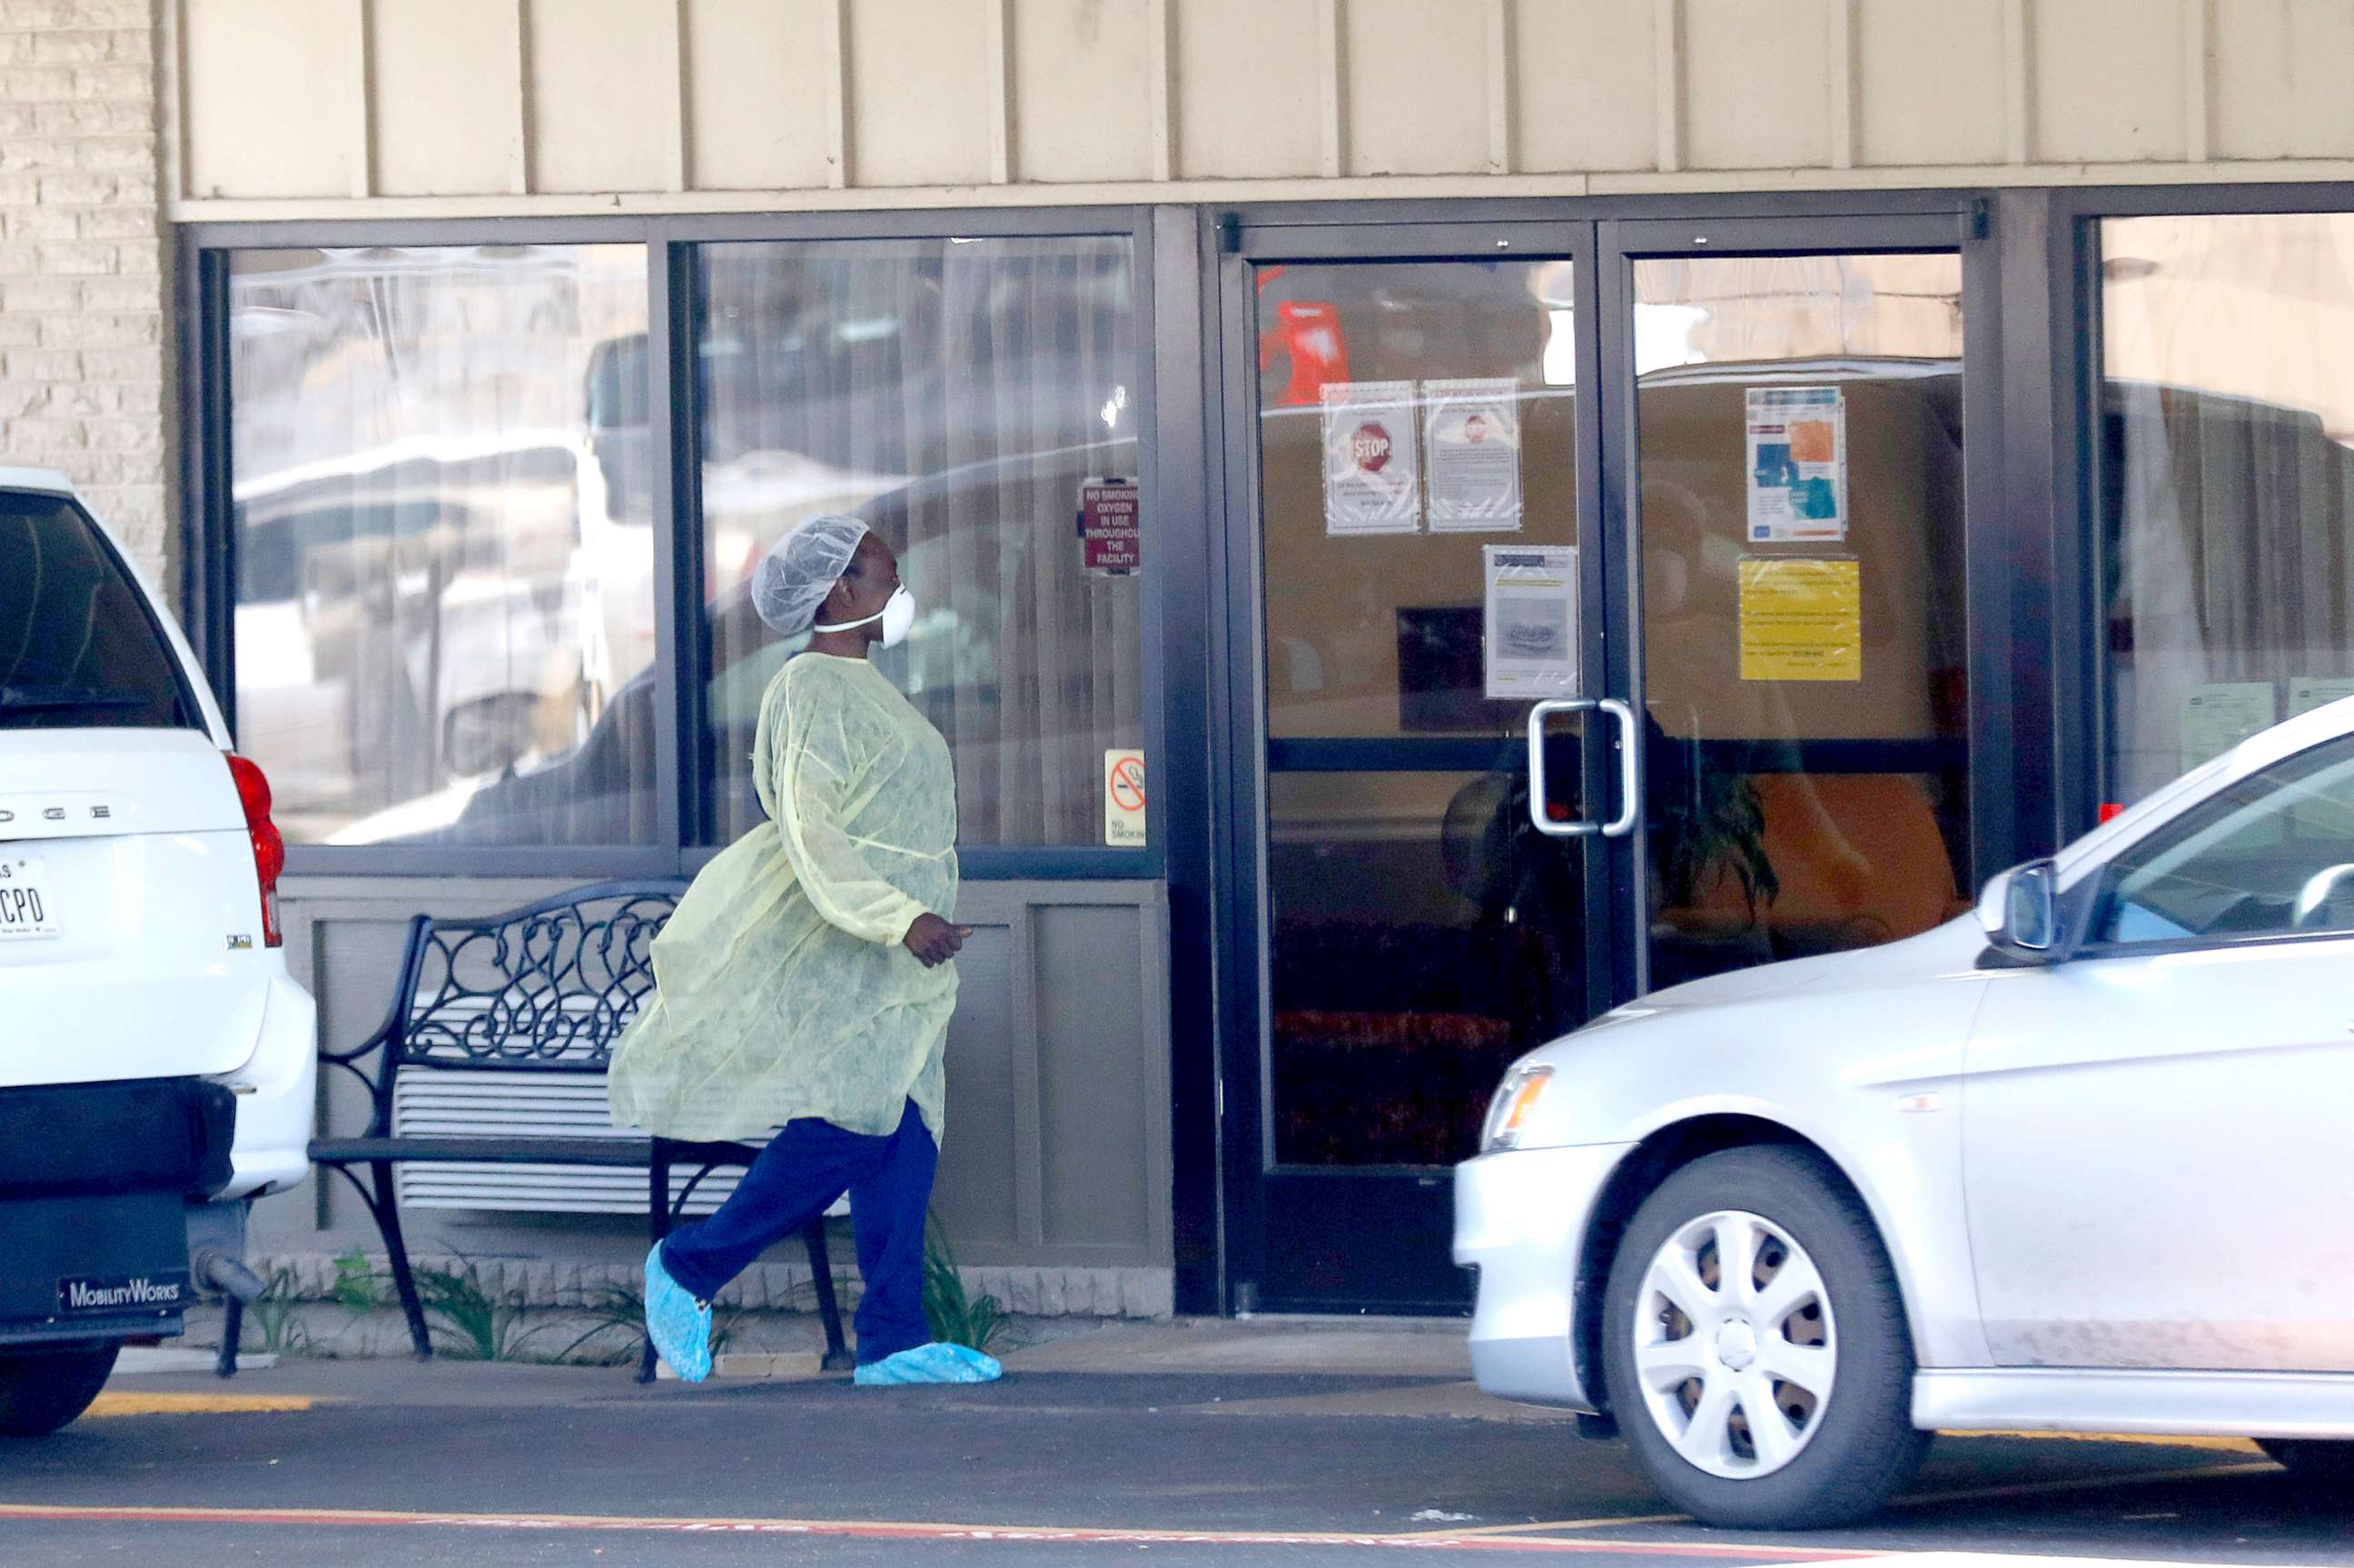 PHOTO: A medical worker wearing personal protective equipment walks outside the Paris Healthcare Center in Paris, Texas, April 29, 2020.